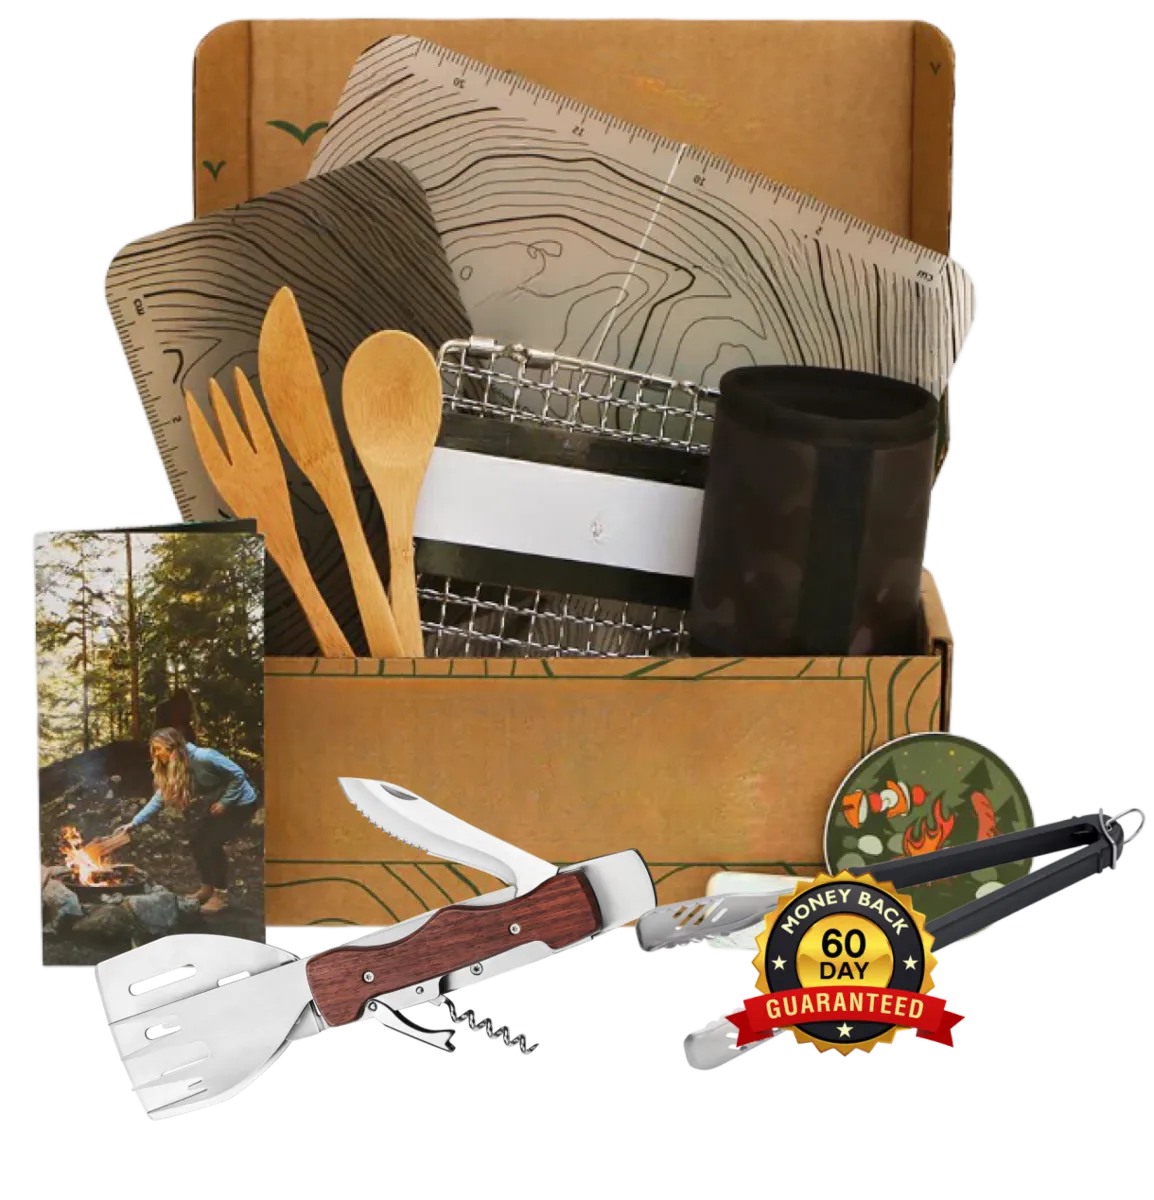 Join Kitchen Connoisseur Club Monthly Box